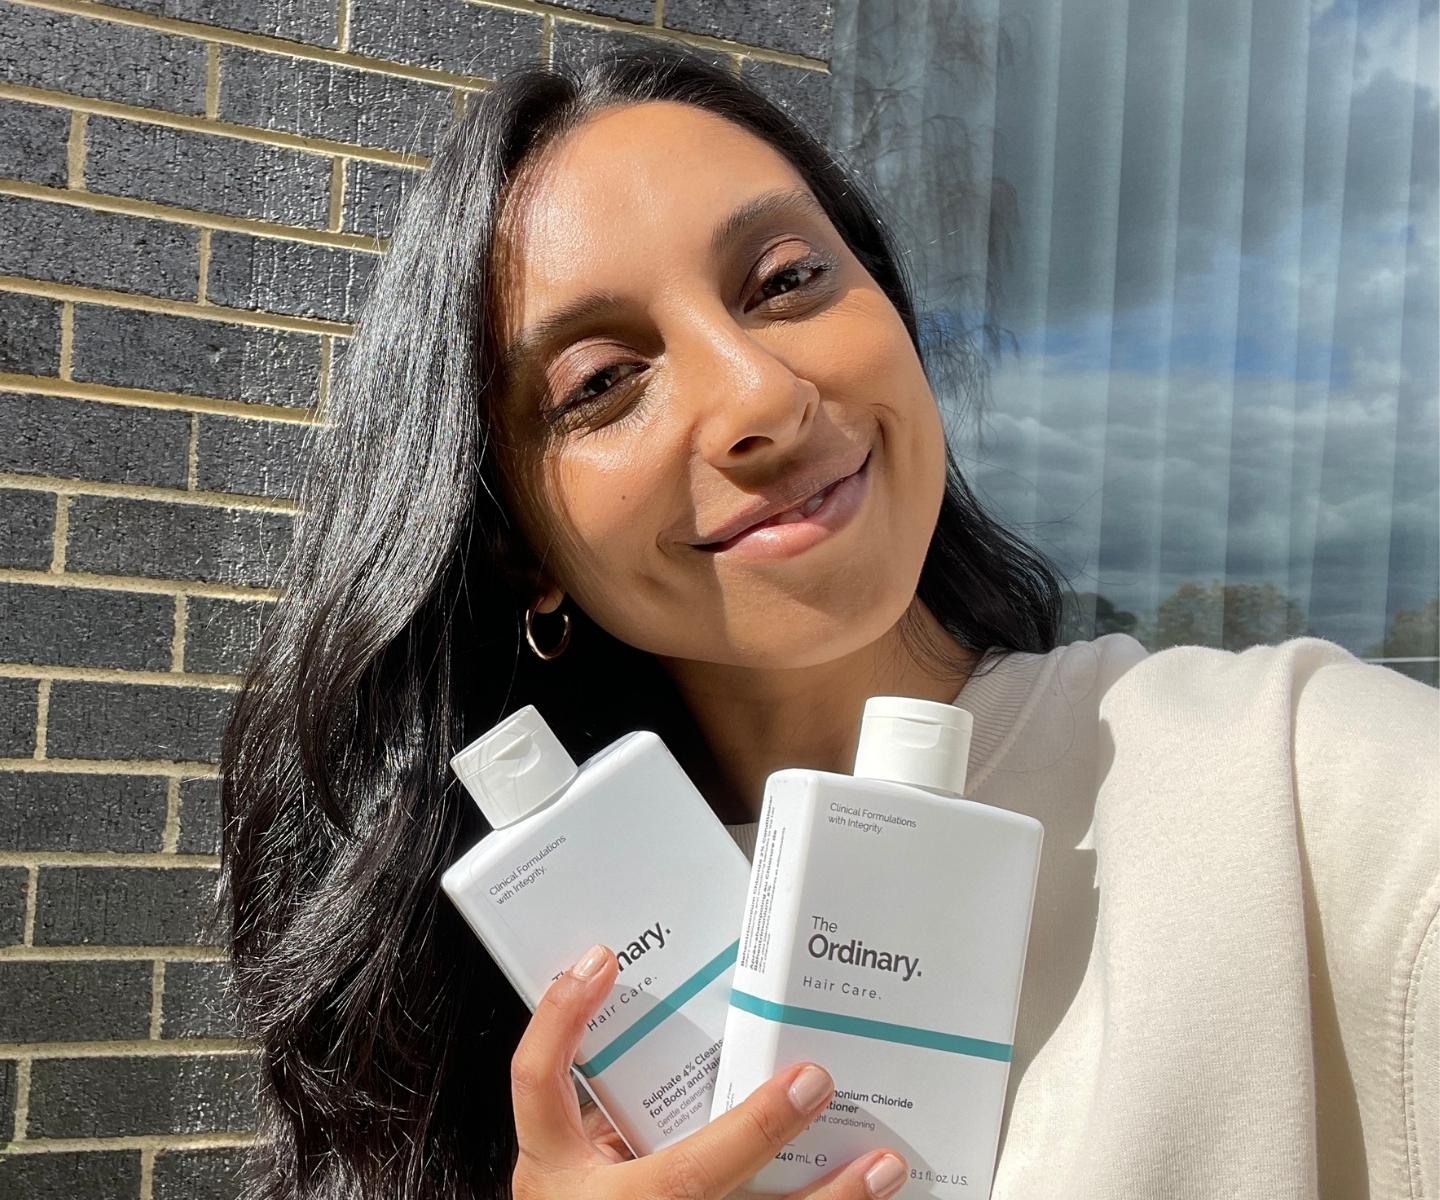 The Ordinary\'s New Hair Products Are Finally Here, But Are They as Good as  the Skin Care?